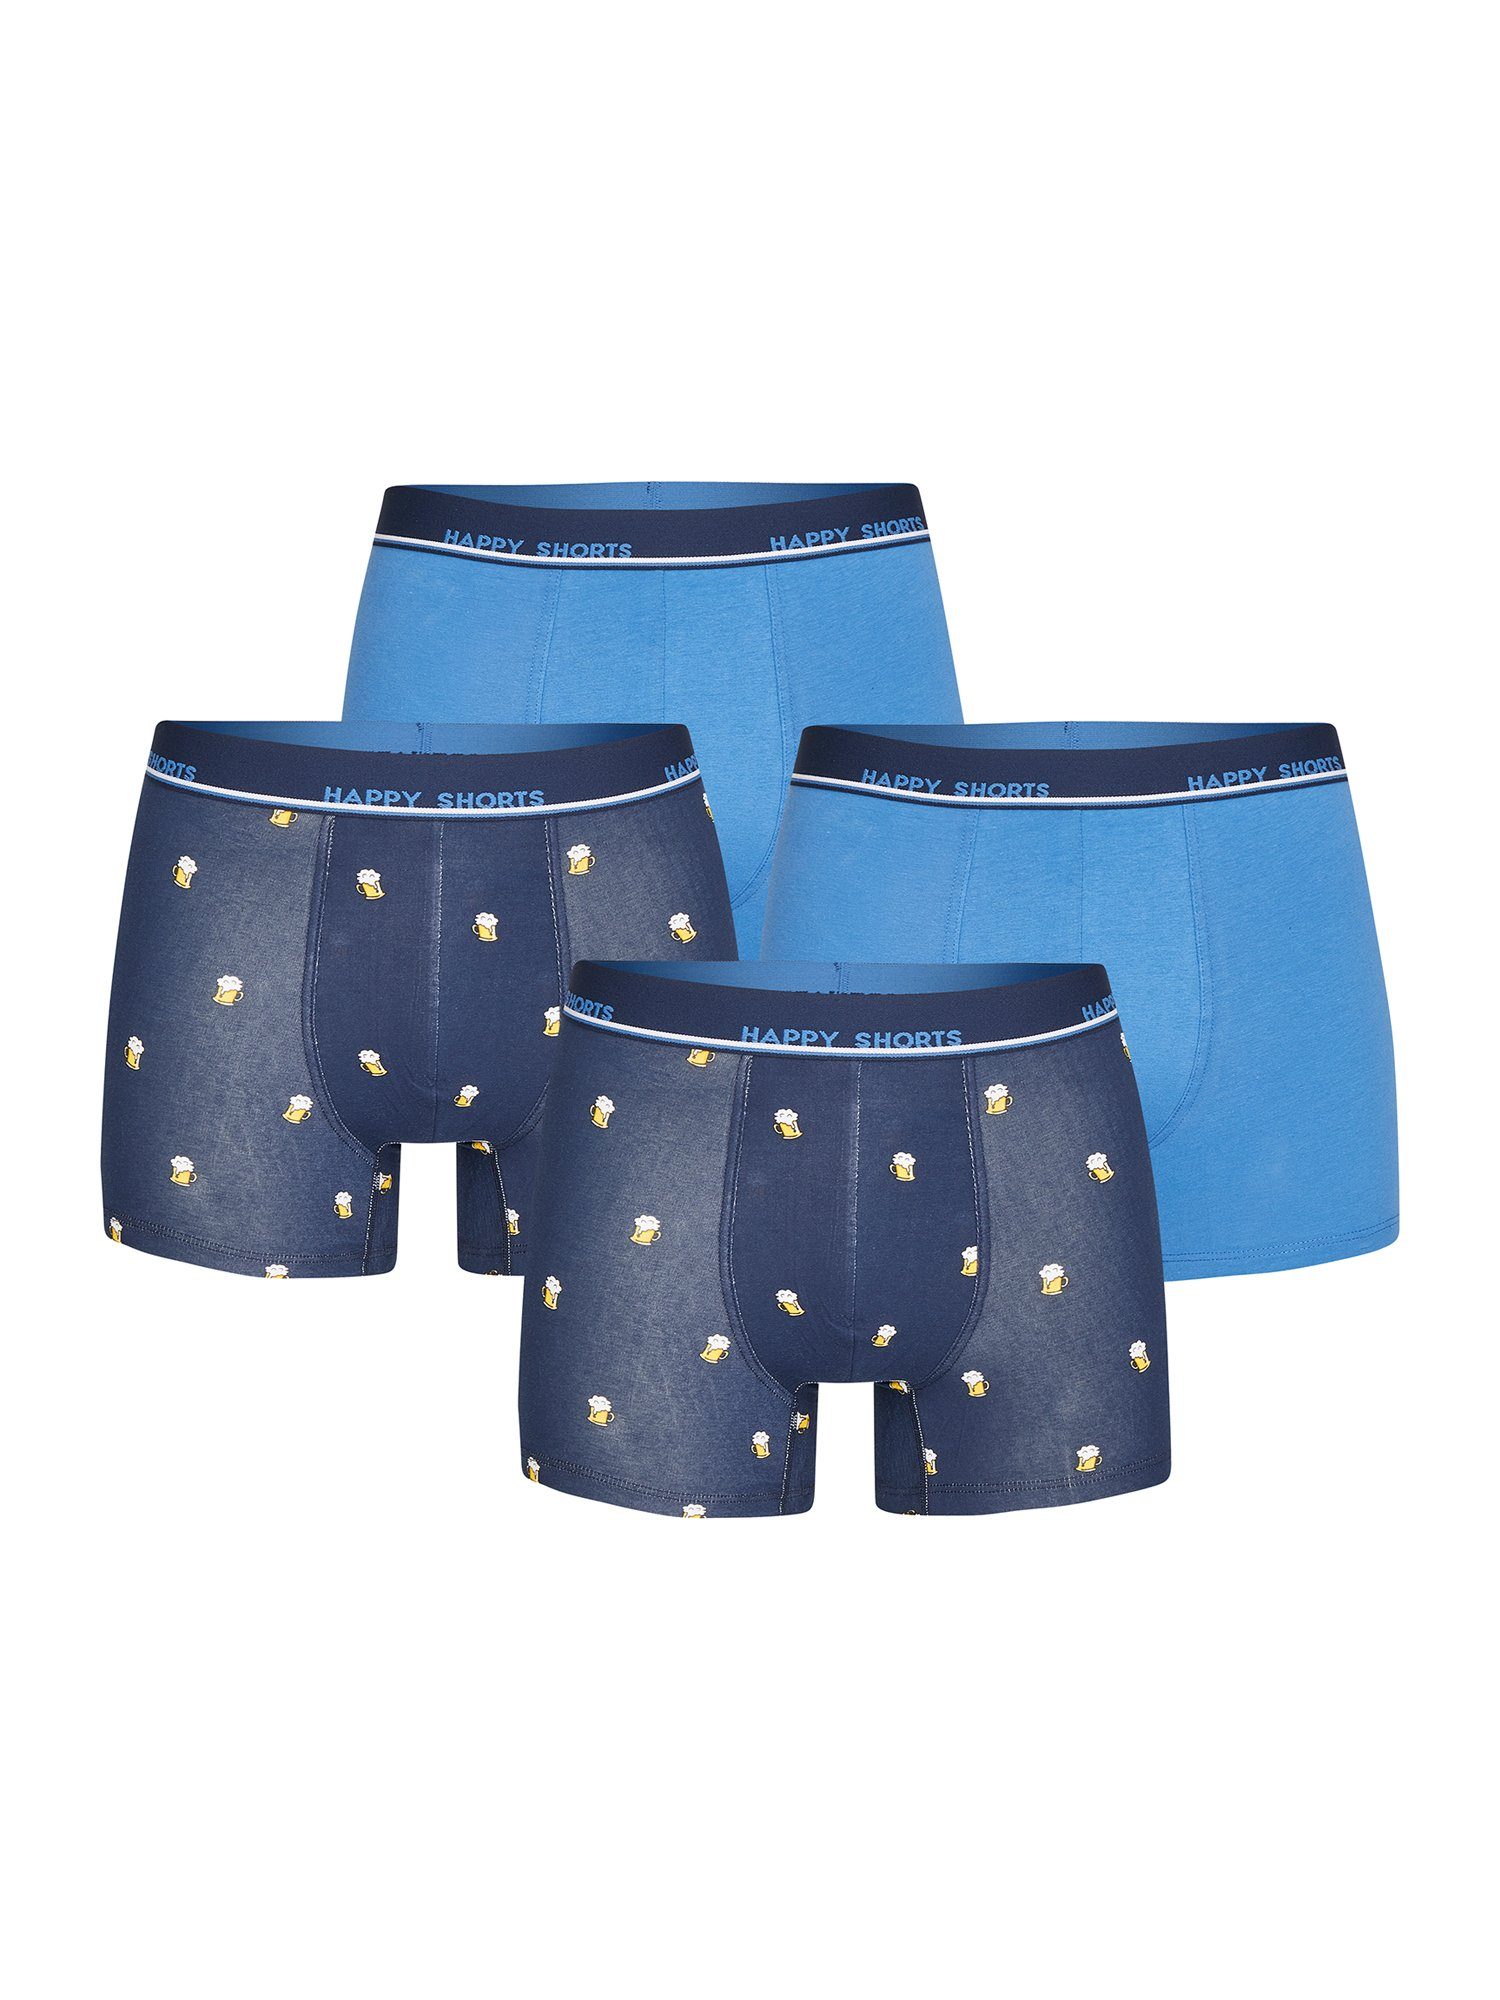 Beer SHORTS Boxer HAPPY (4-St)